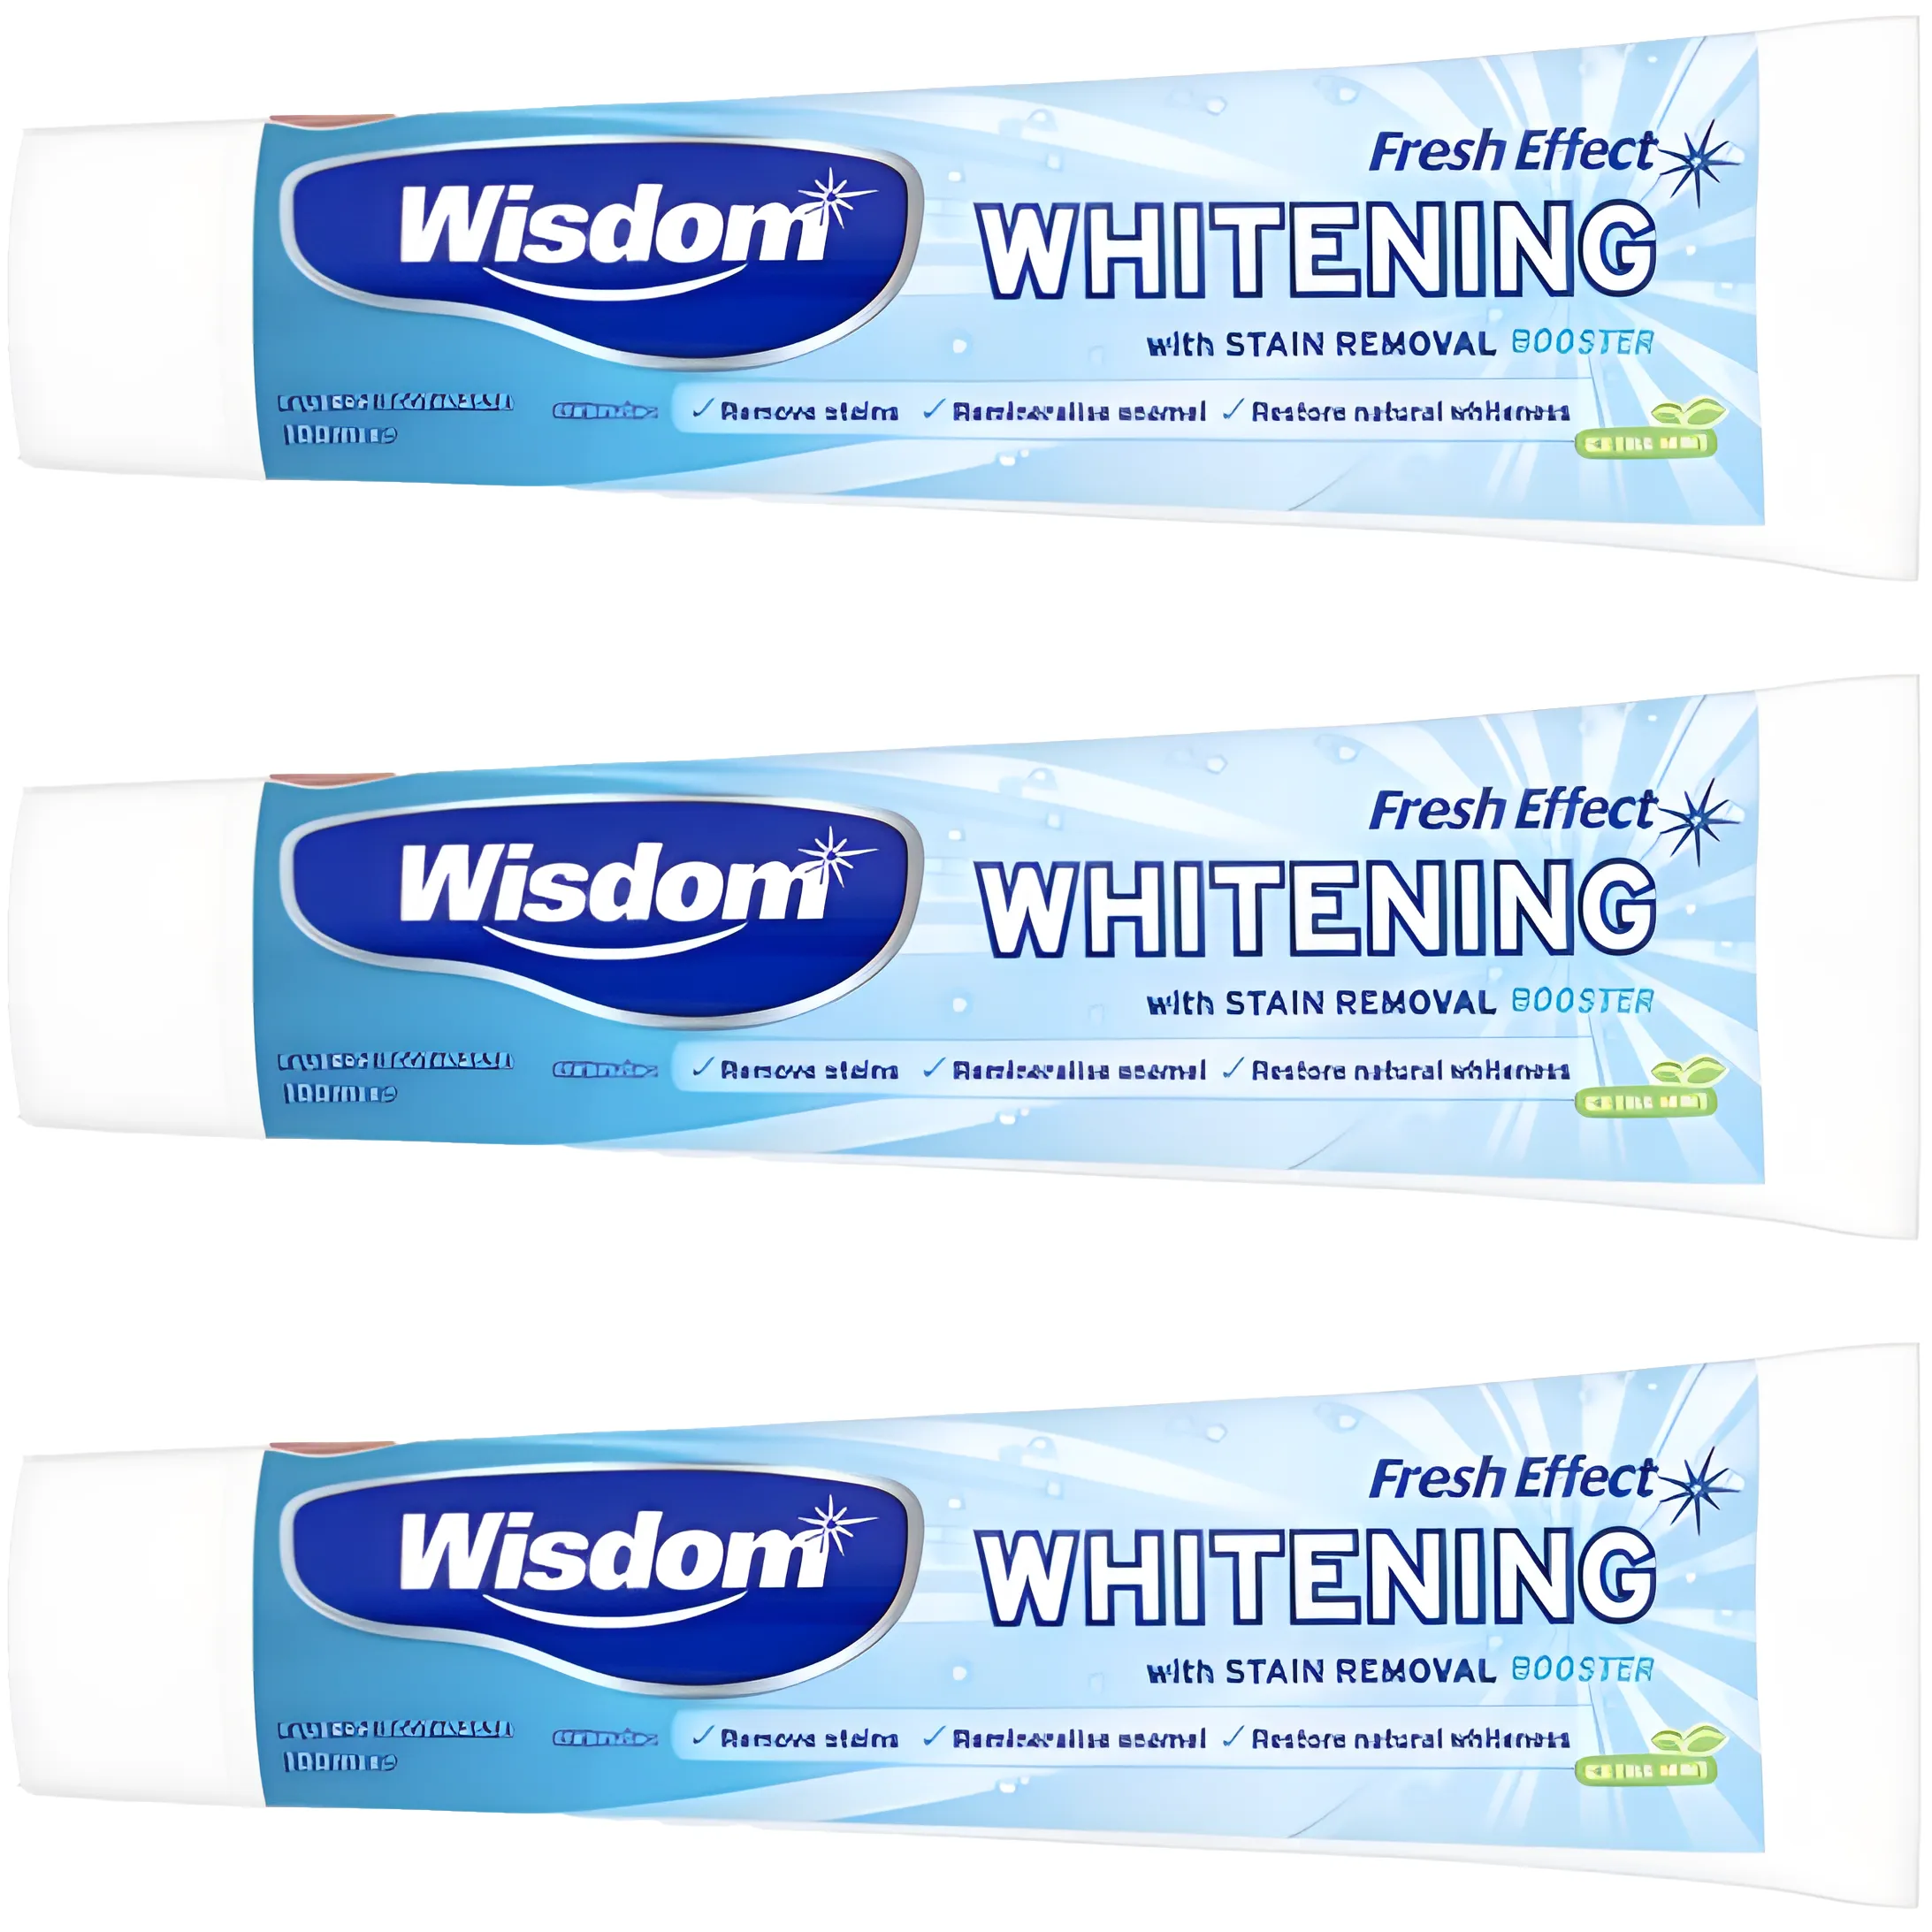 Free Wisdom Toothpaste For Winners